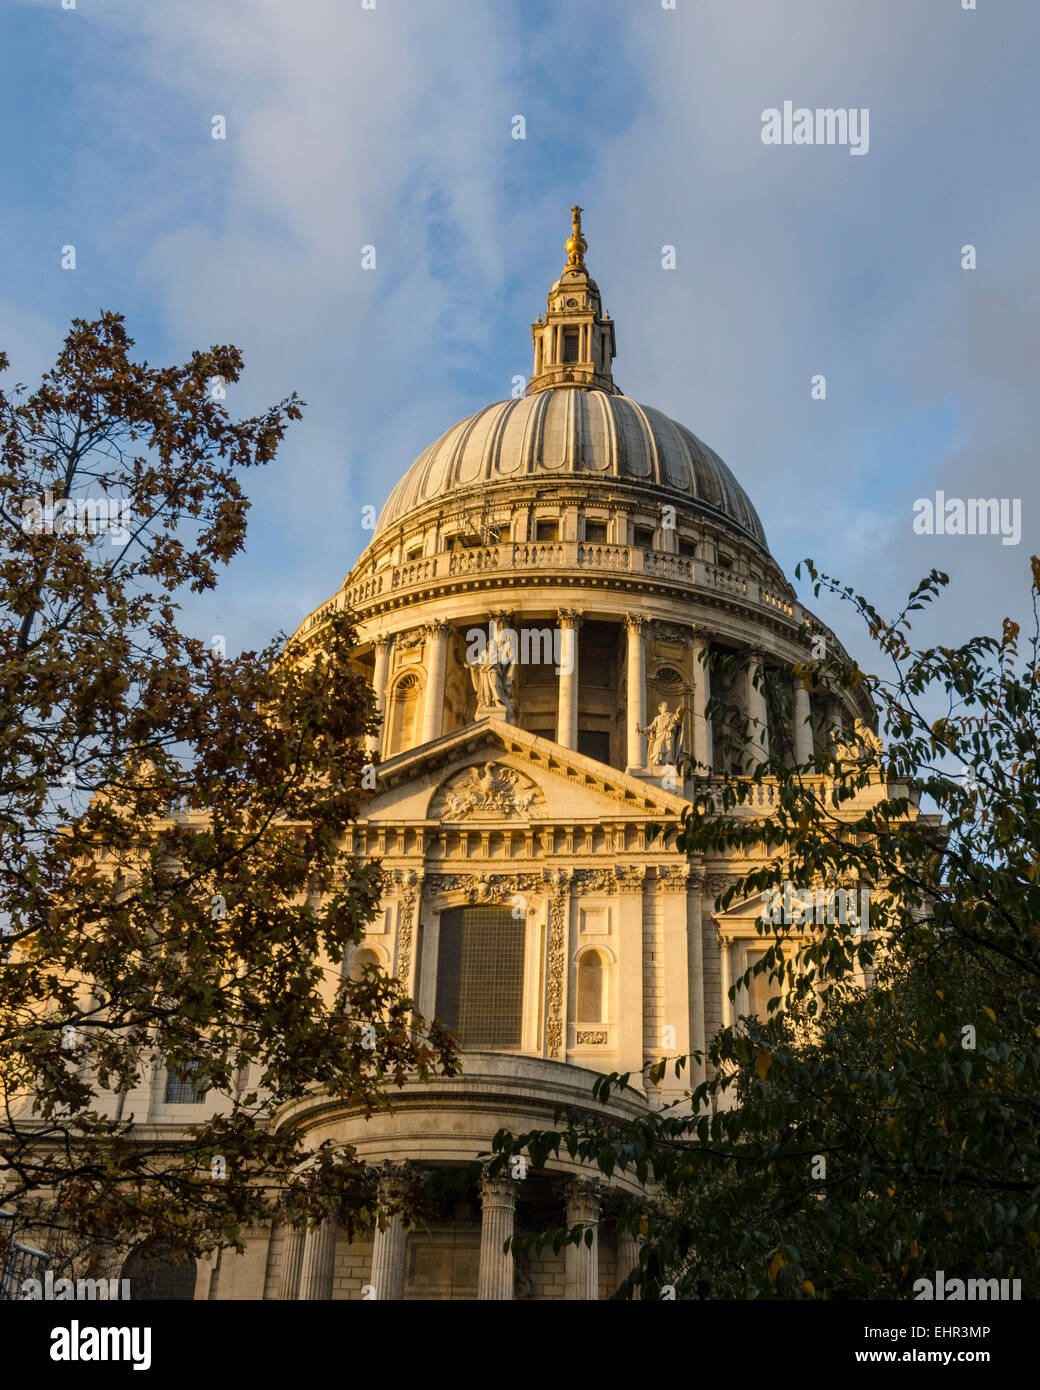 Looking up at the south facade of St Paul's Cathedral in London, designed by Sir Christopher Wren in the English Baroque style. Stock Photo